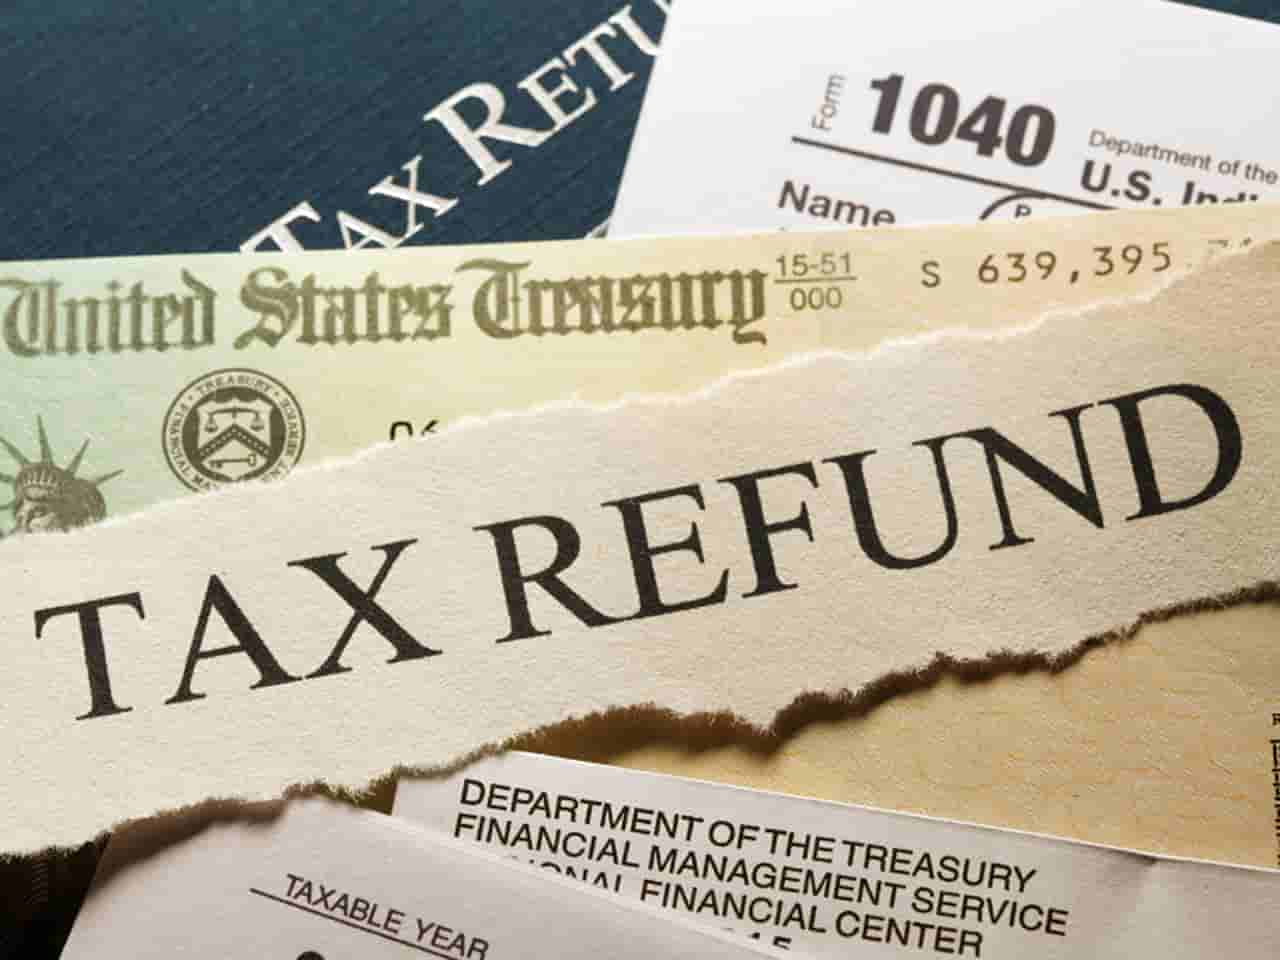 The tax refund has been reduced to 11% this year due to the expiration of most pandemic-era tax benefits.